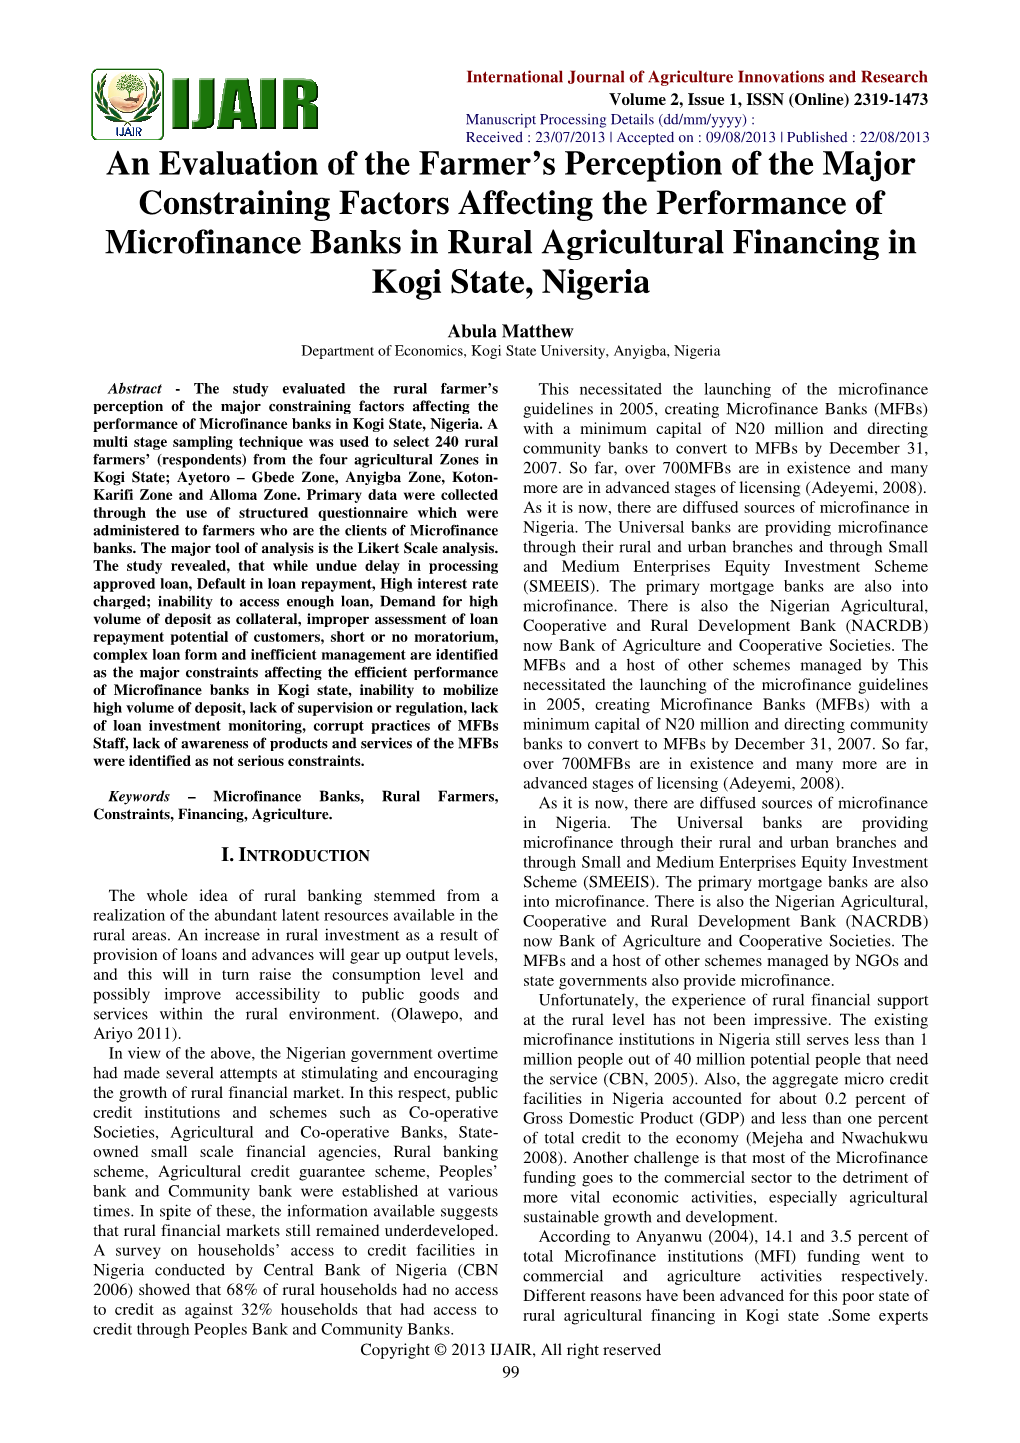 An Evaluation of the Constraining Factors Affect Microfinance Banks in Rural a Aluation of the Farmer's Perception of Factors